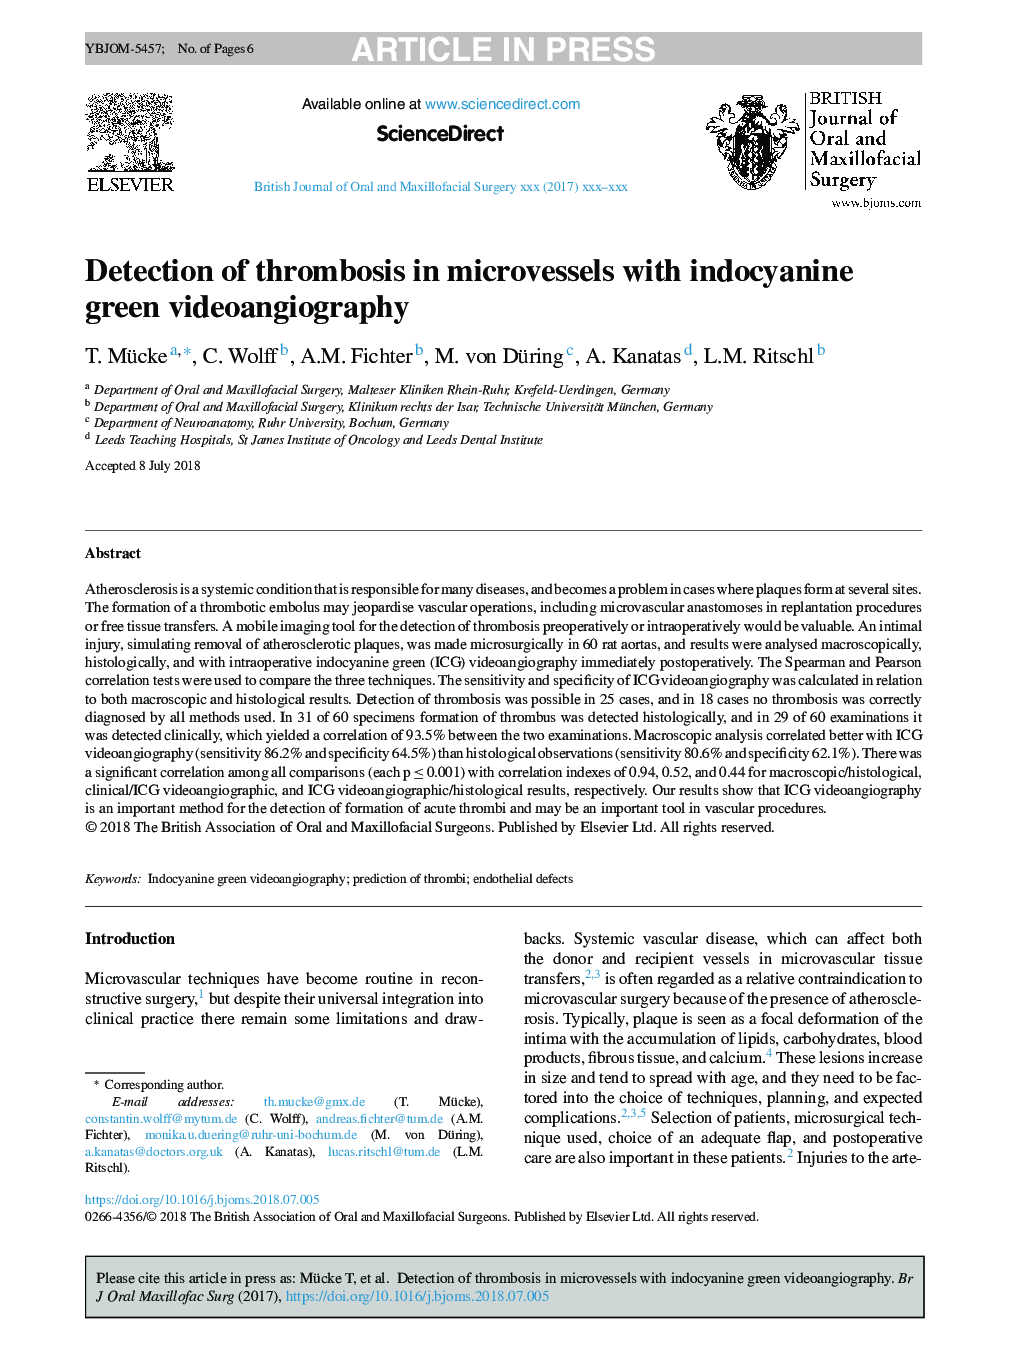 Detection of thrombosis in microvessels with indocyanine green videoangiography